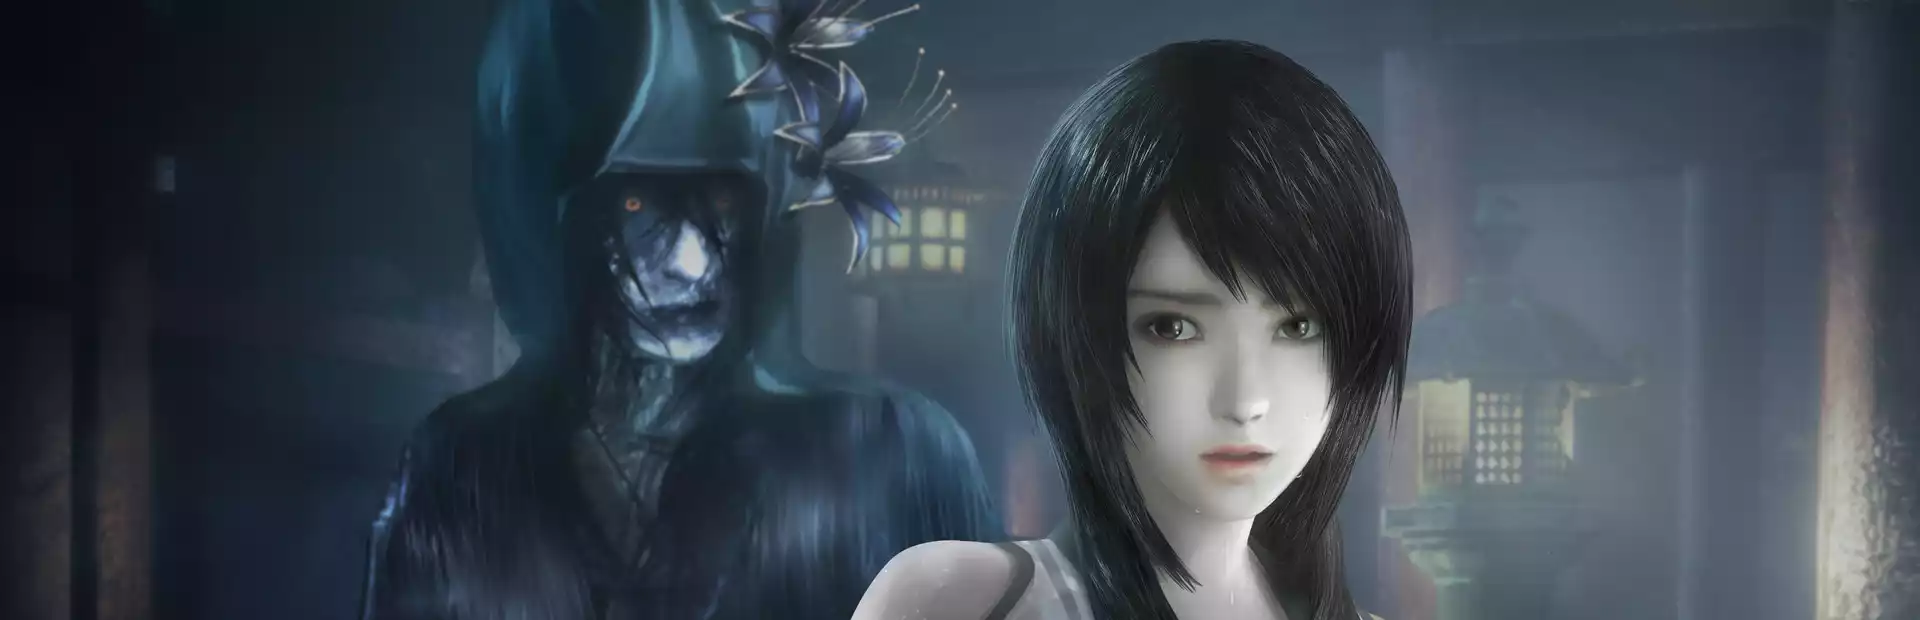 FATAL FRAME / PROJECT ZERO: Maiden of Black Water Steam Key GLOBAL